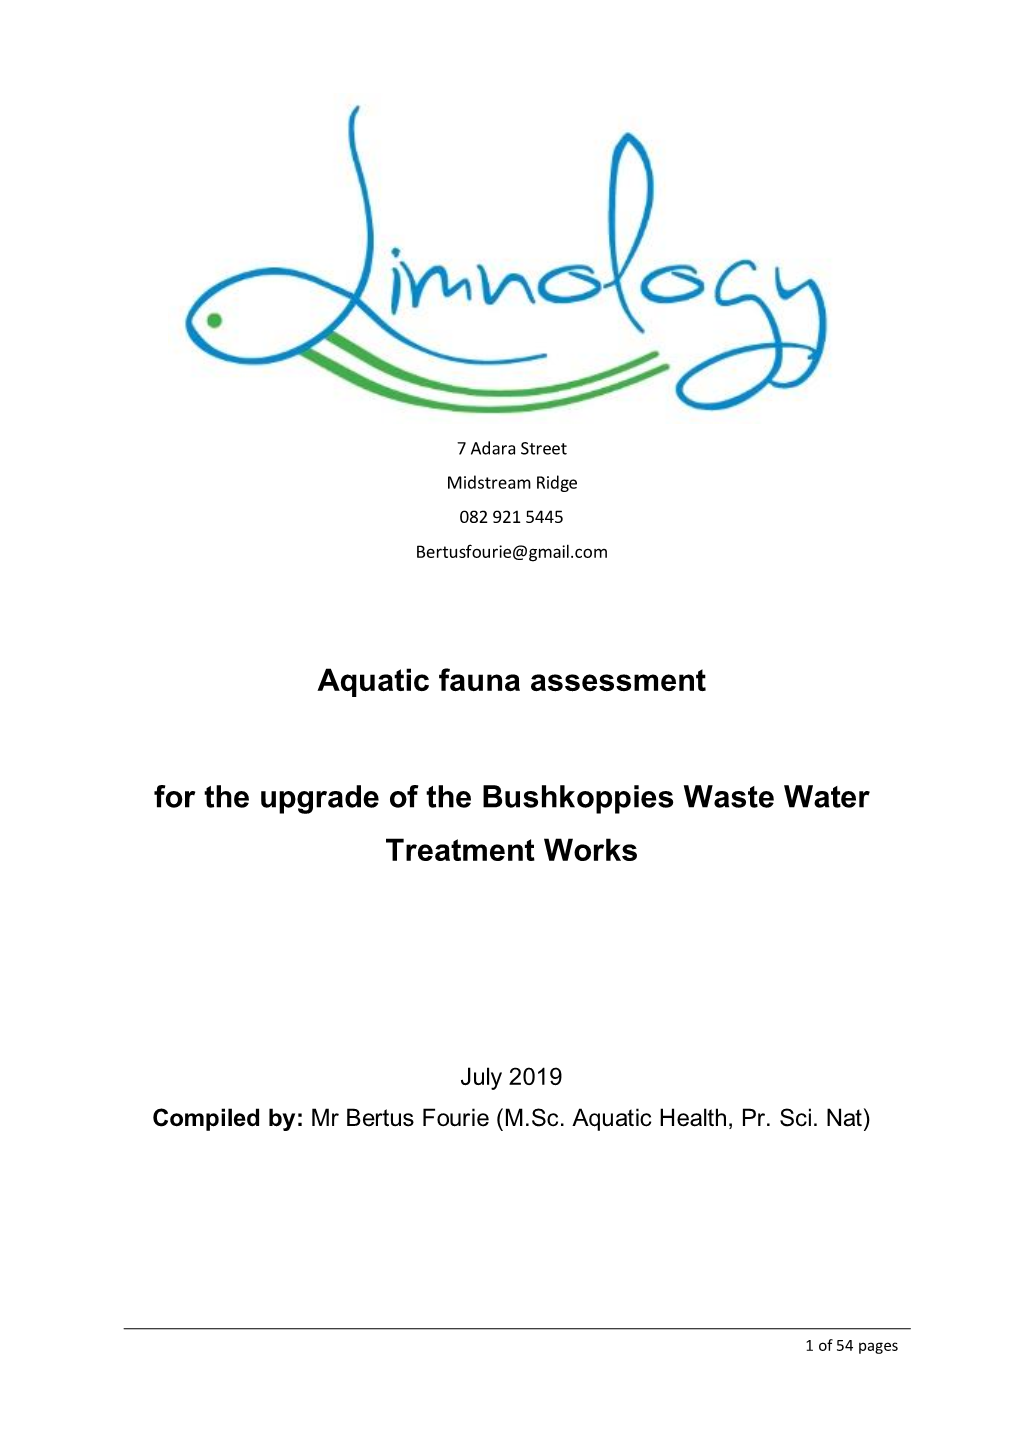 Aquatic Fauna Assessment for the Upgrade of the Bushkoppies Waste